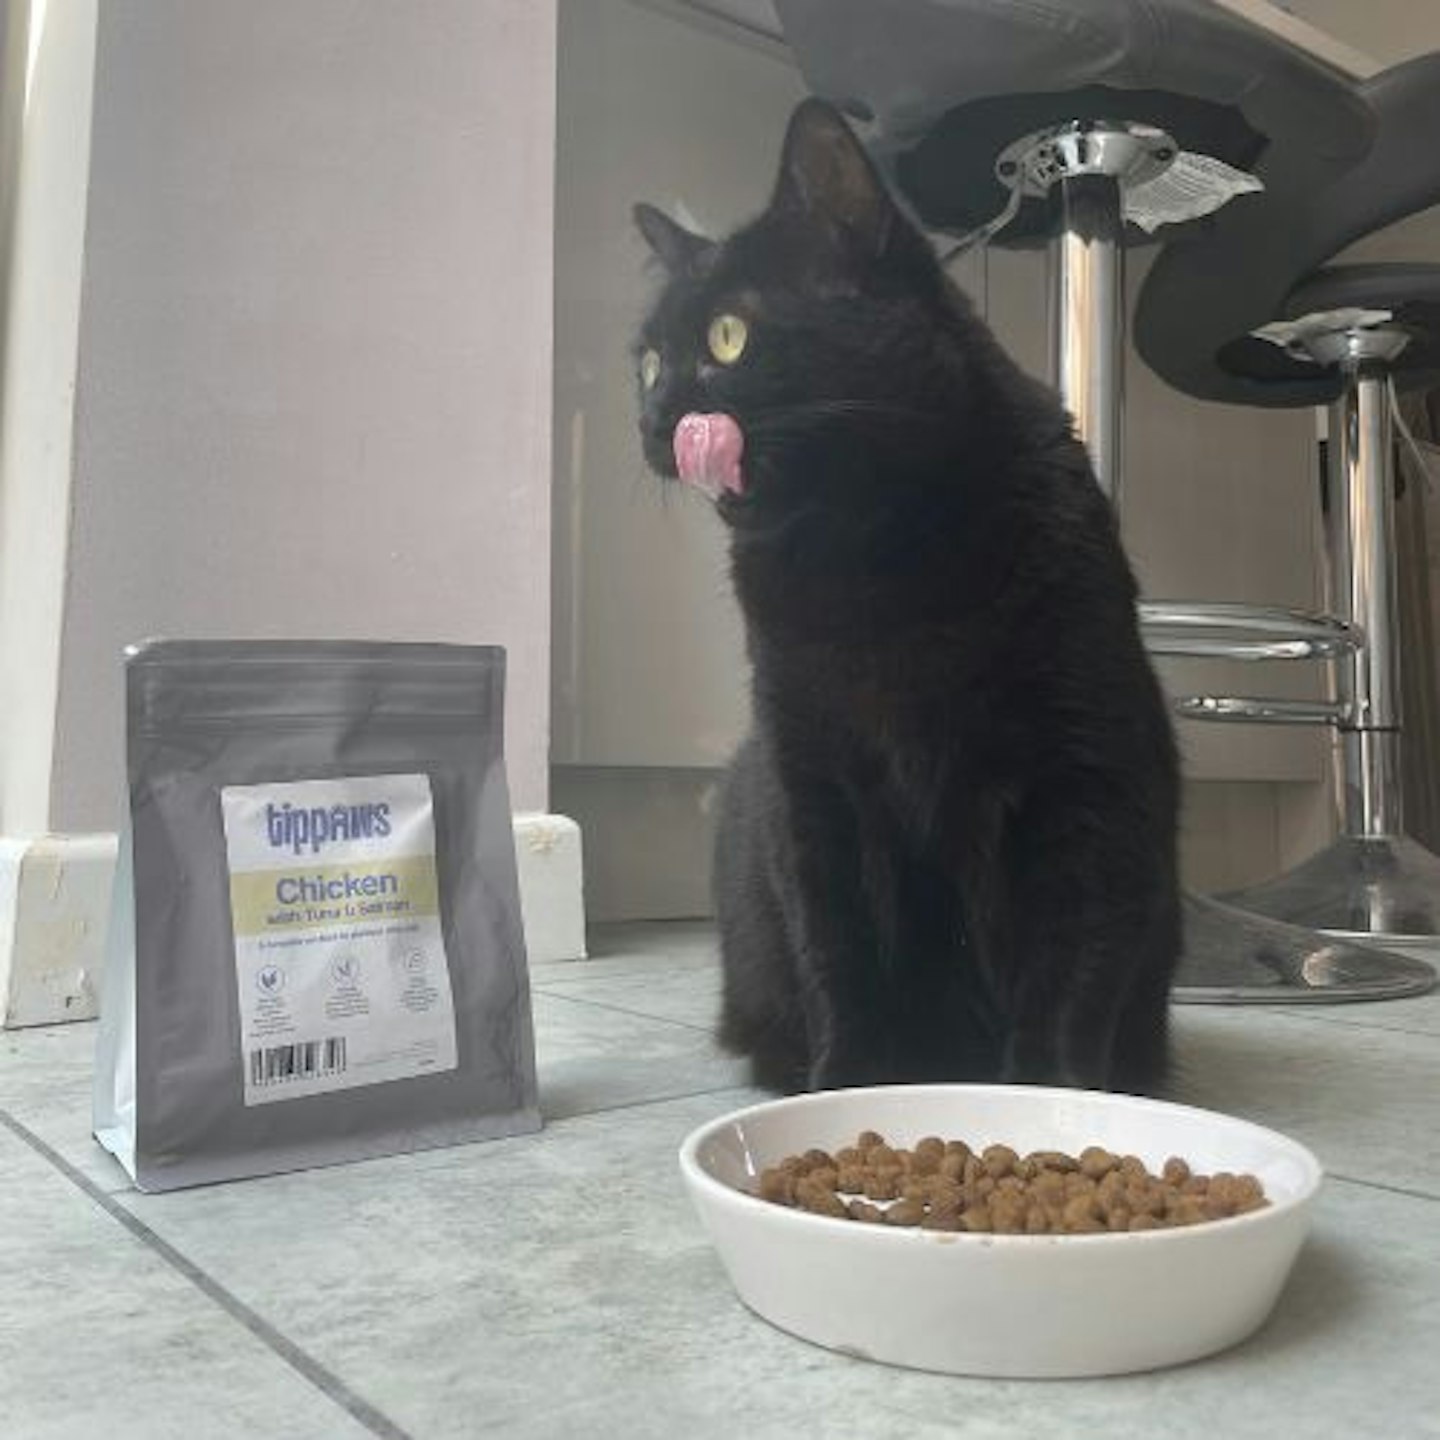 Piper's Cat, Myrtle, is licking her lips with her new Tippaws food.,